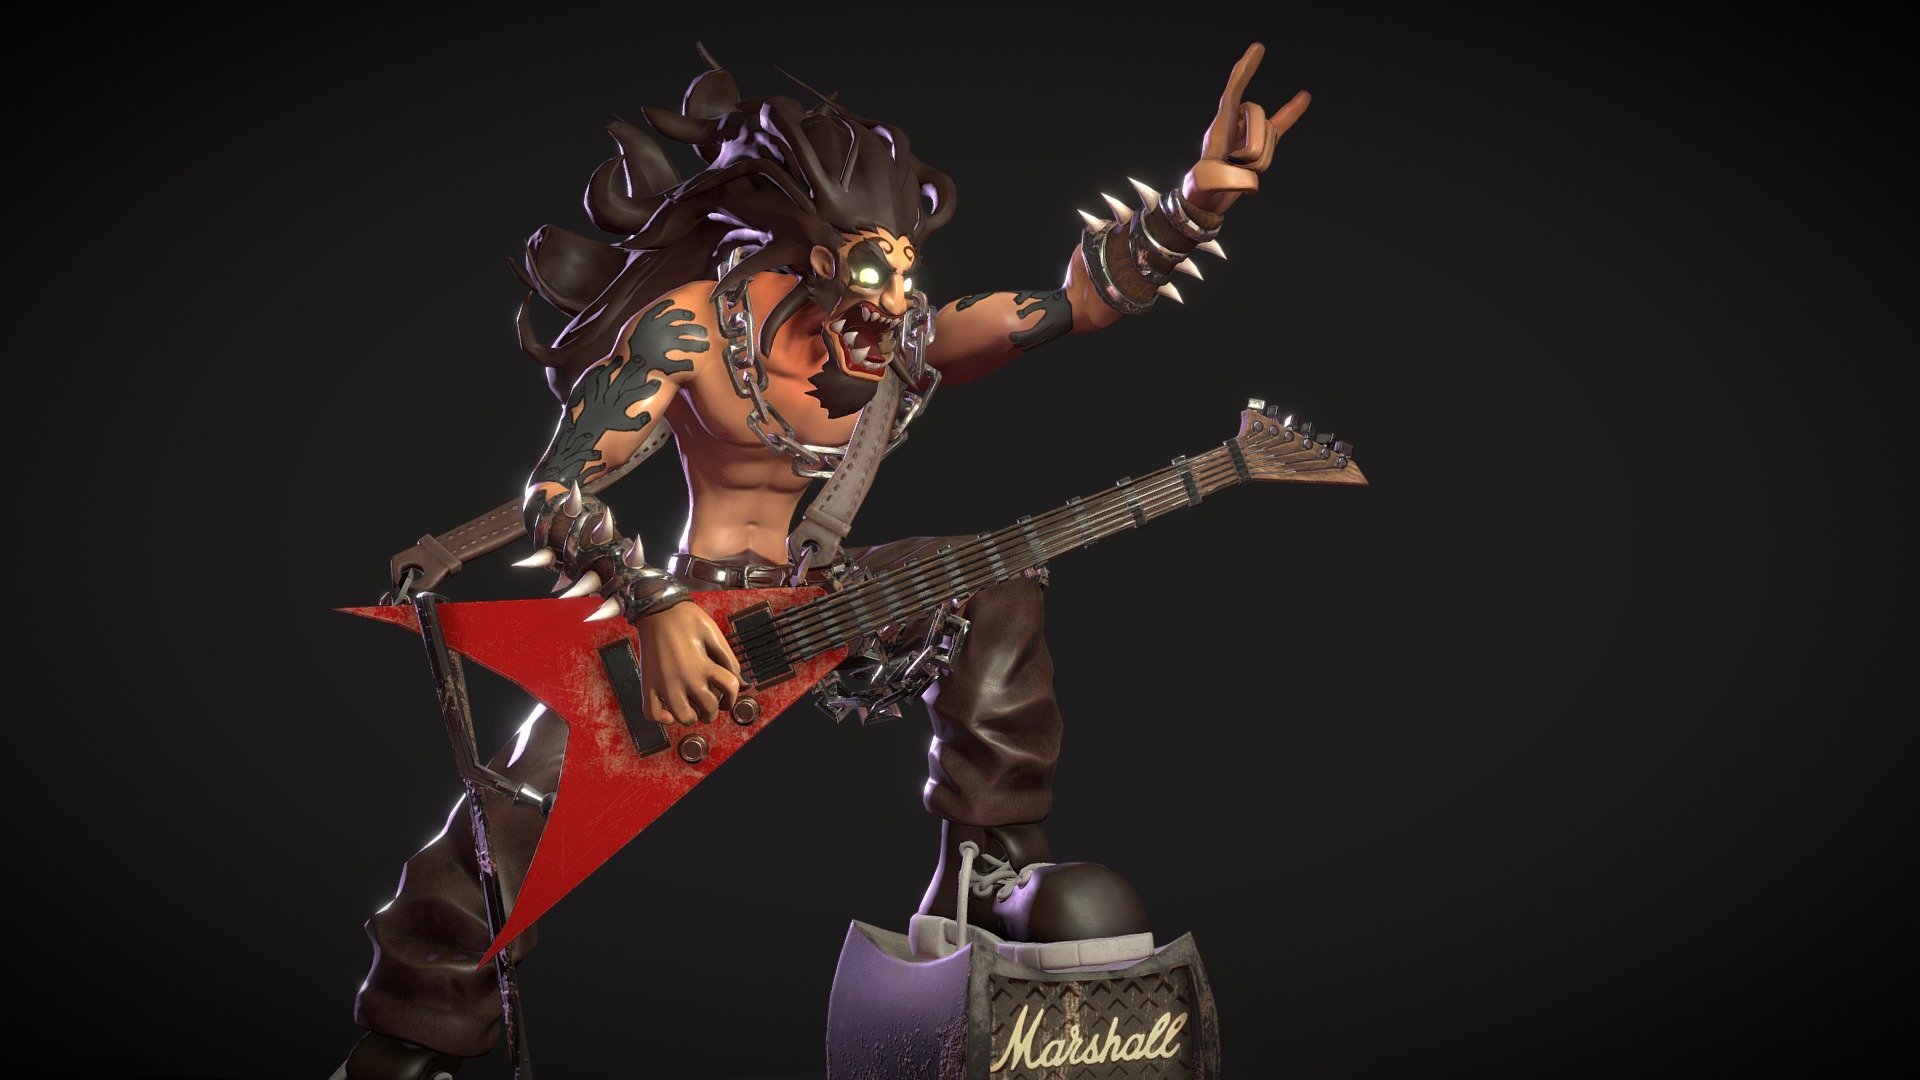 My 3D iteration of Johannes Helgeson's Mangy Dog!
Heavy metal never dies!

Made with 3Dsmax, Zbrush and Substance painter

Orginal artwork: https://www.artstation.com/artwork/lNzZG

 - Johannes Helgeson's Mangy Dog - CDC Heavy Metal - 3D model by Lorenzo de Vries (@basshunt3r) 3d model